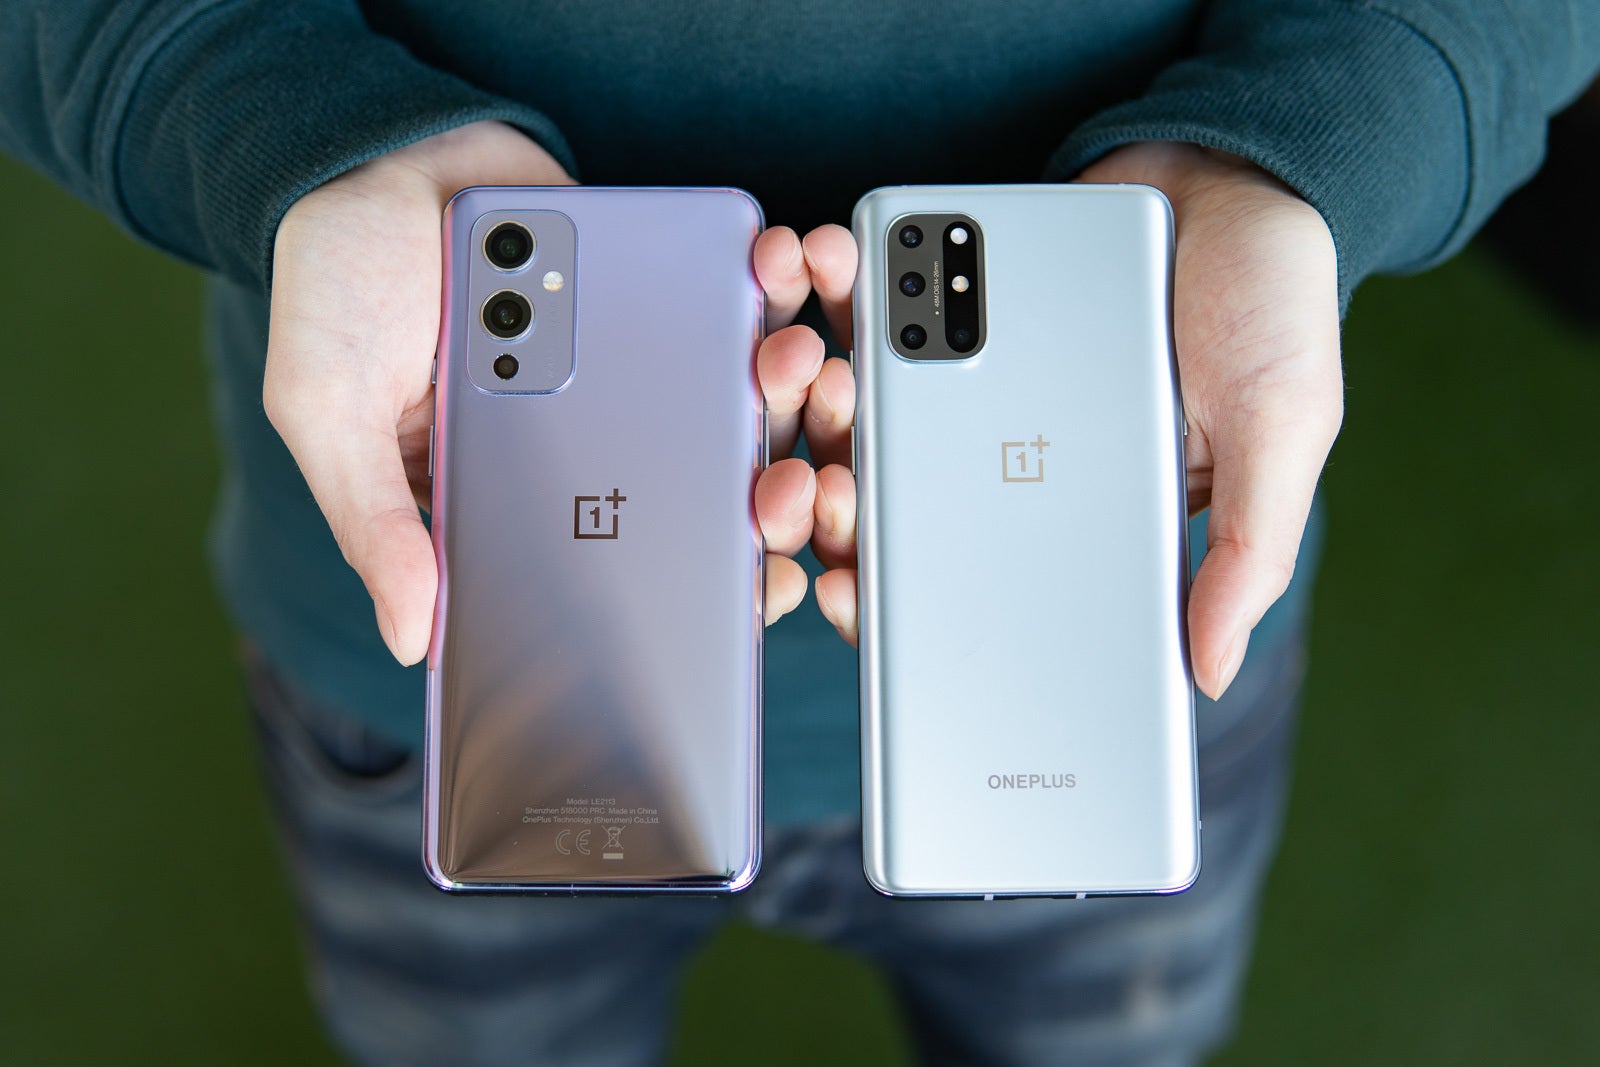 The OnePlus 9 (left) and OnePlus 8T (right) - OnePlus 9 vs OnePlus 8T